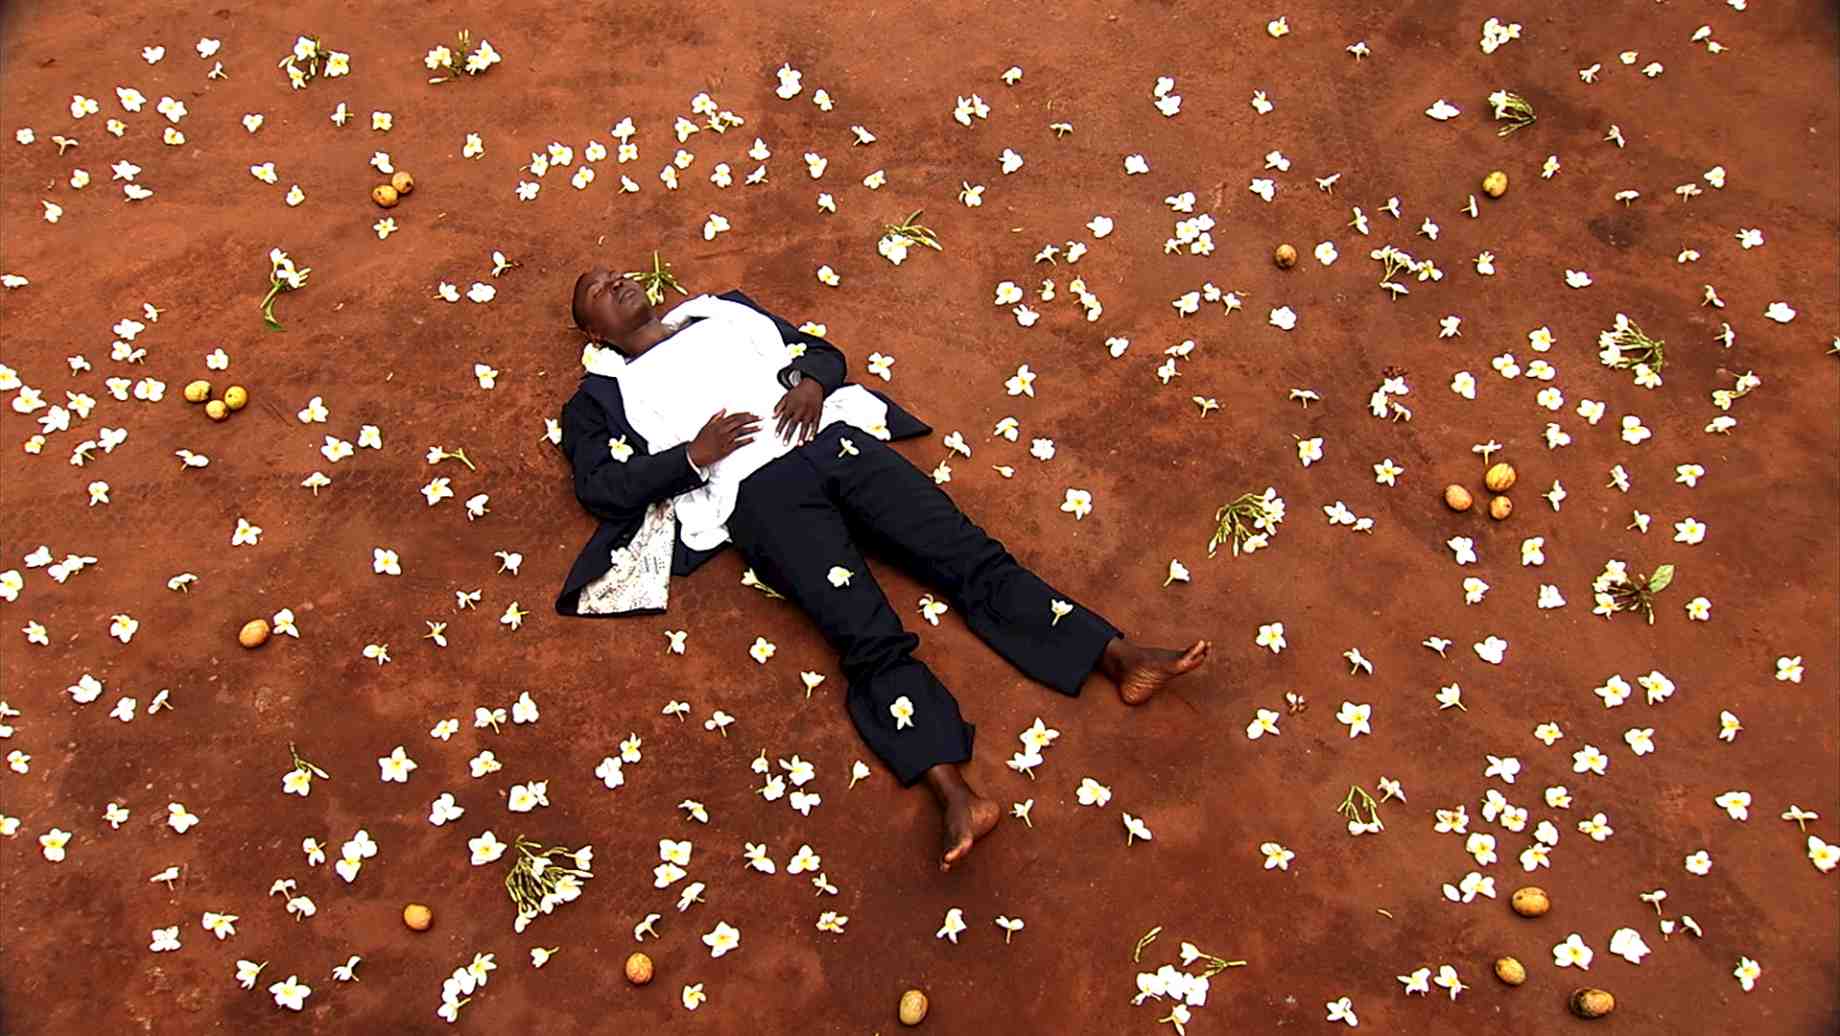 Nora Chipaumire, as her father in the film NORA, lies in stillness as flowers fall around her.